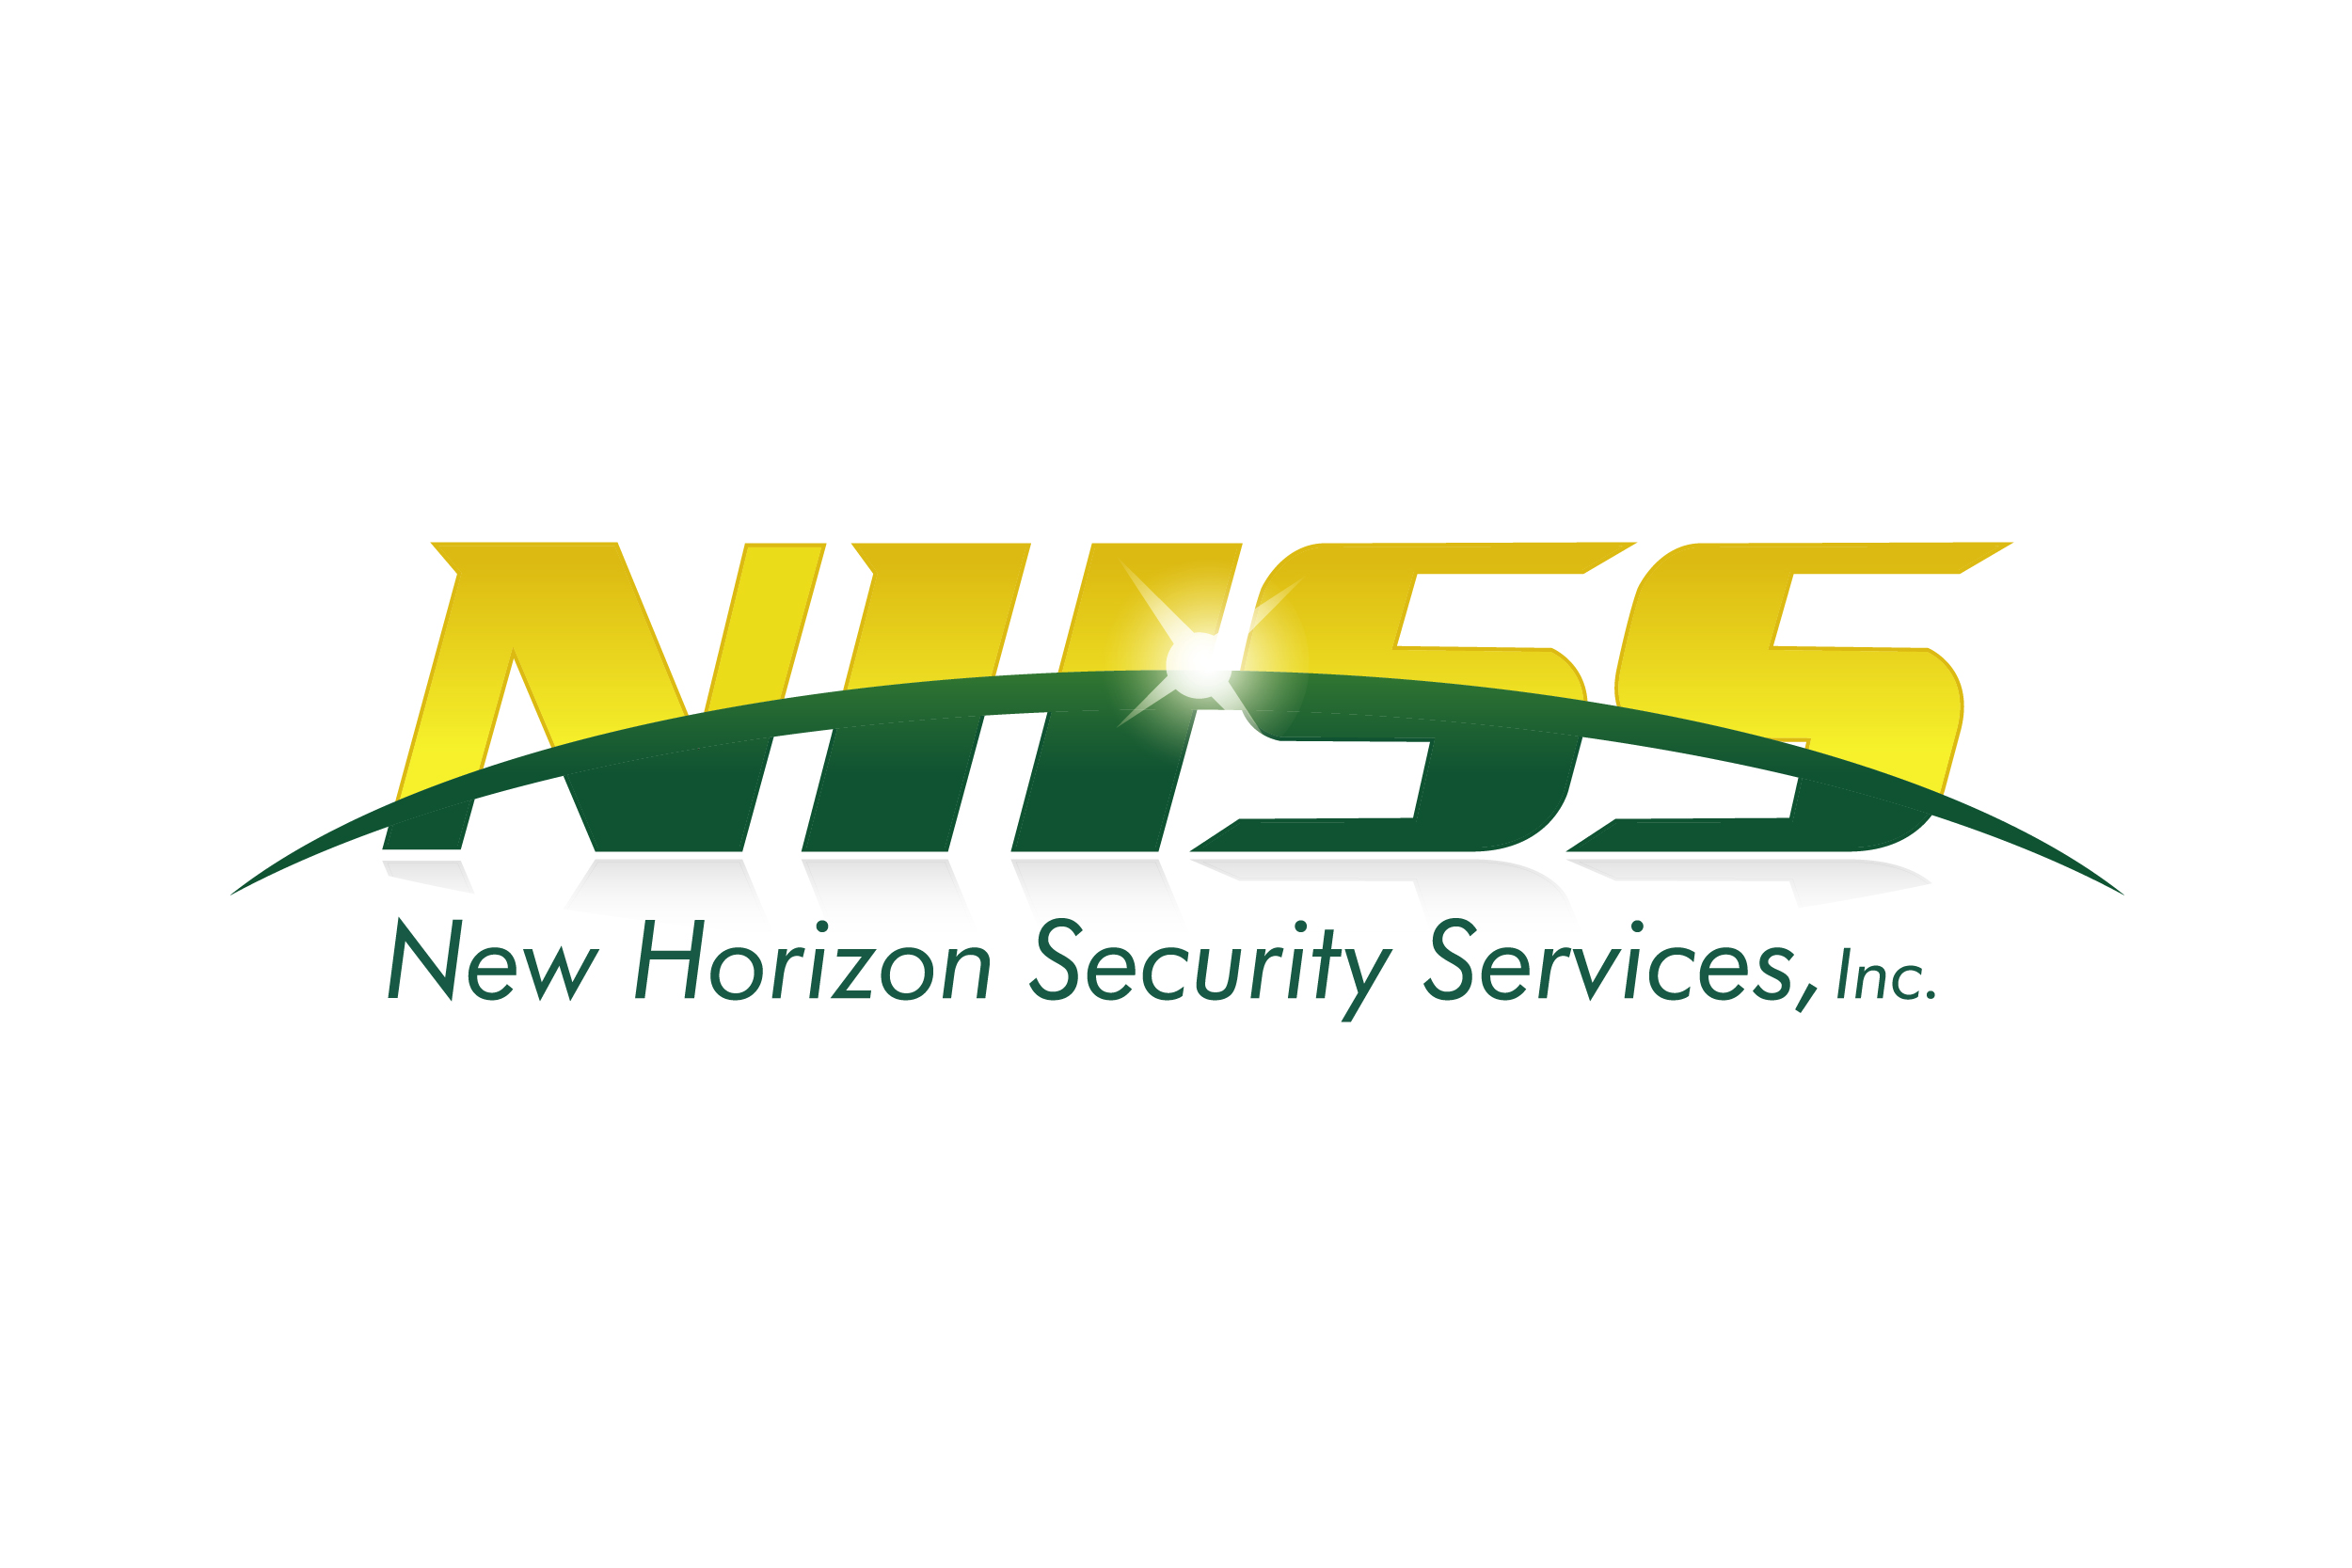 New Horizon Security Services will provide security services to MWAA at Reagan National Airport.